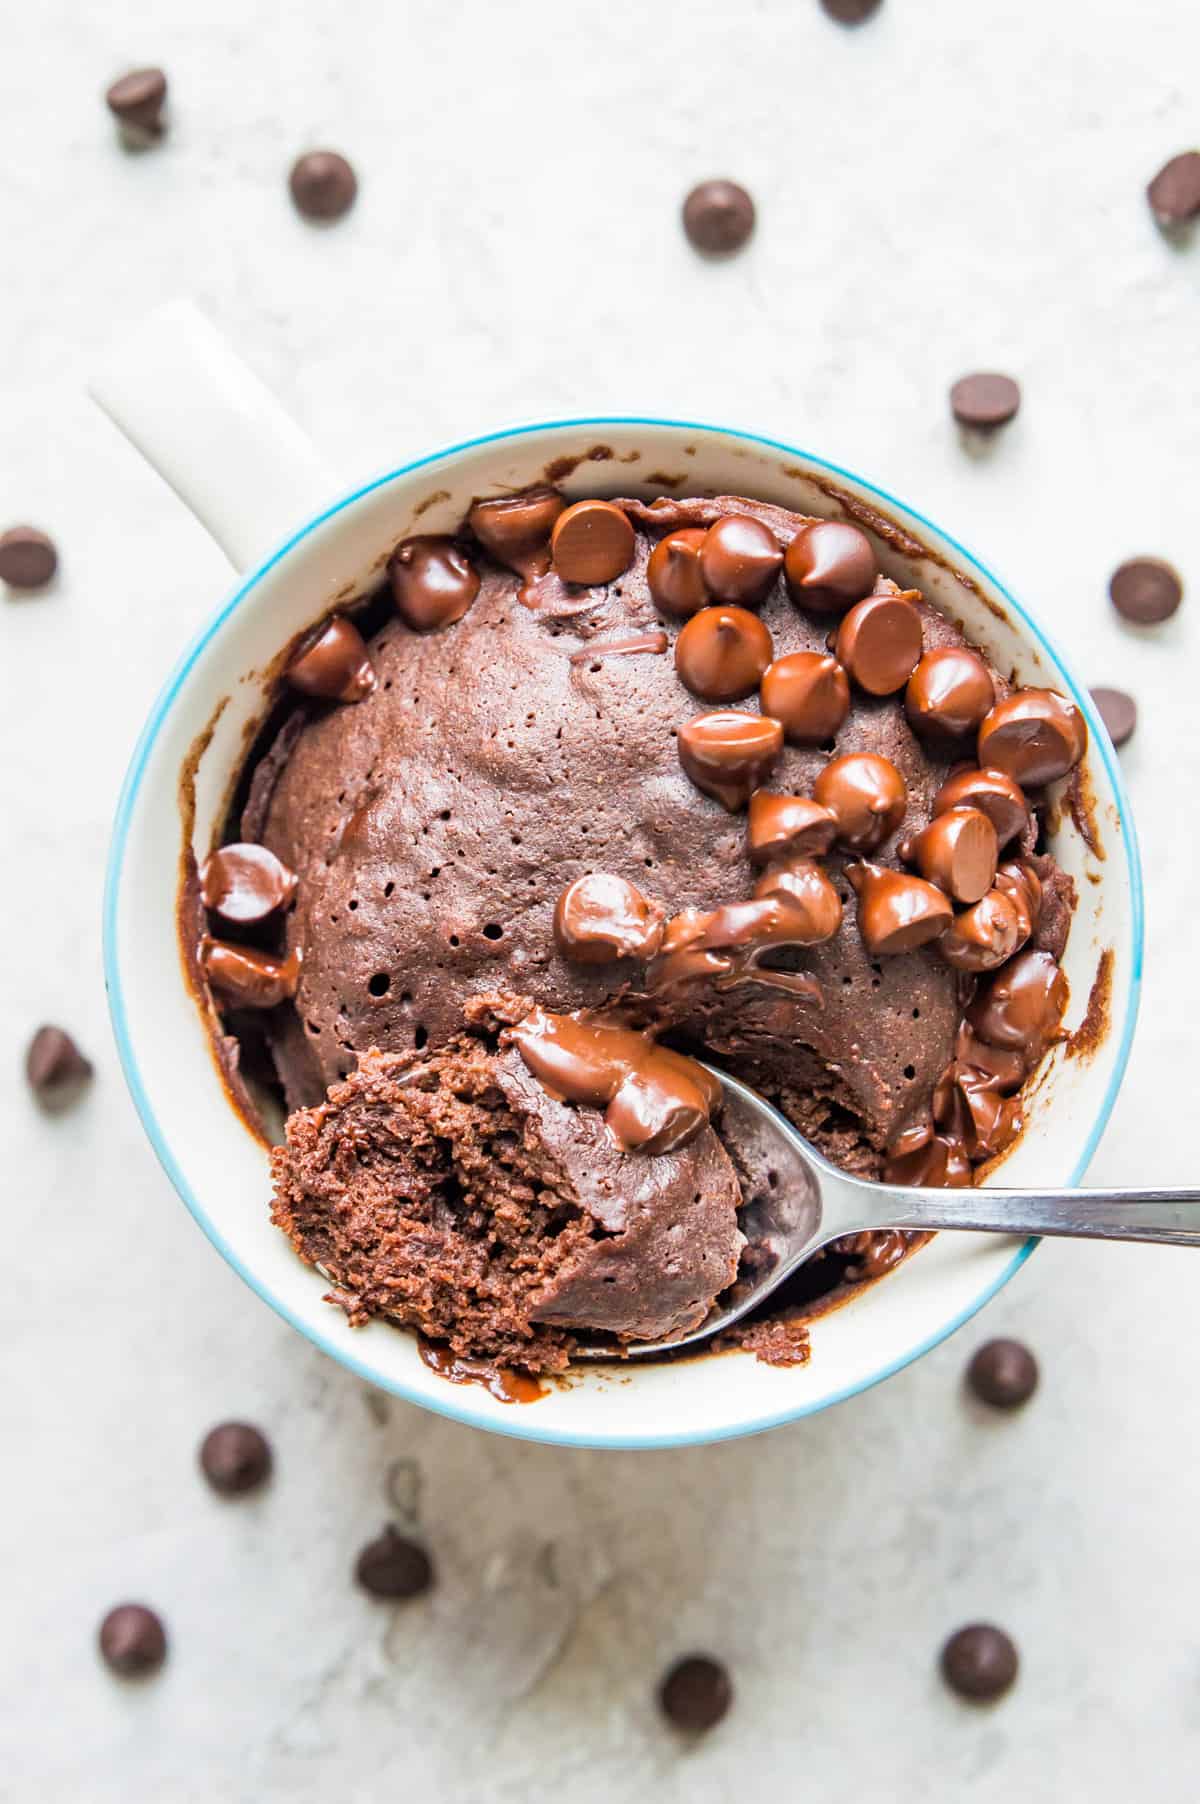 A chocolate mug cake with chocolate chips on top of it and a spoon with a piece of cake resting on it.